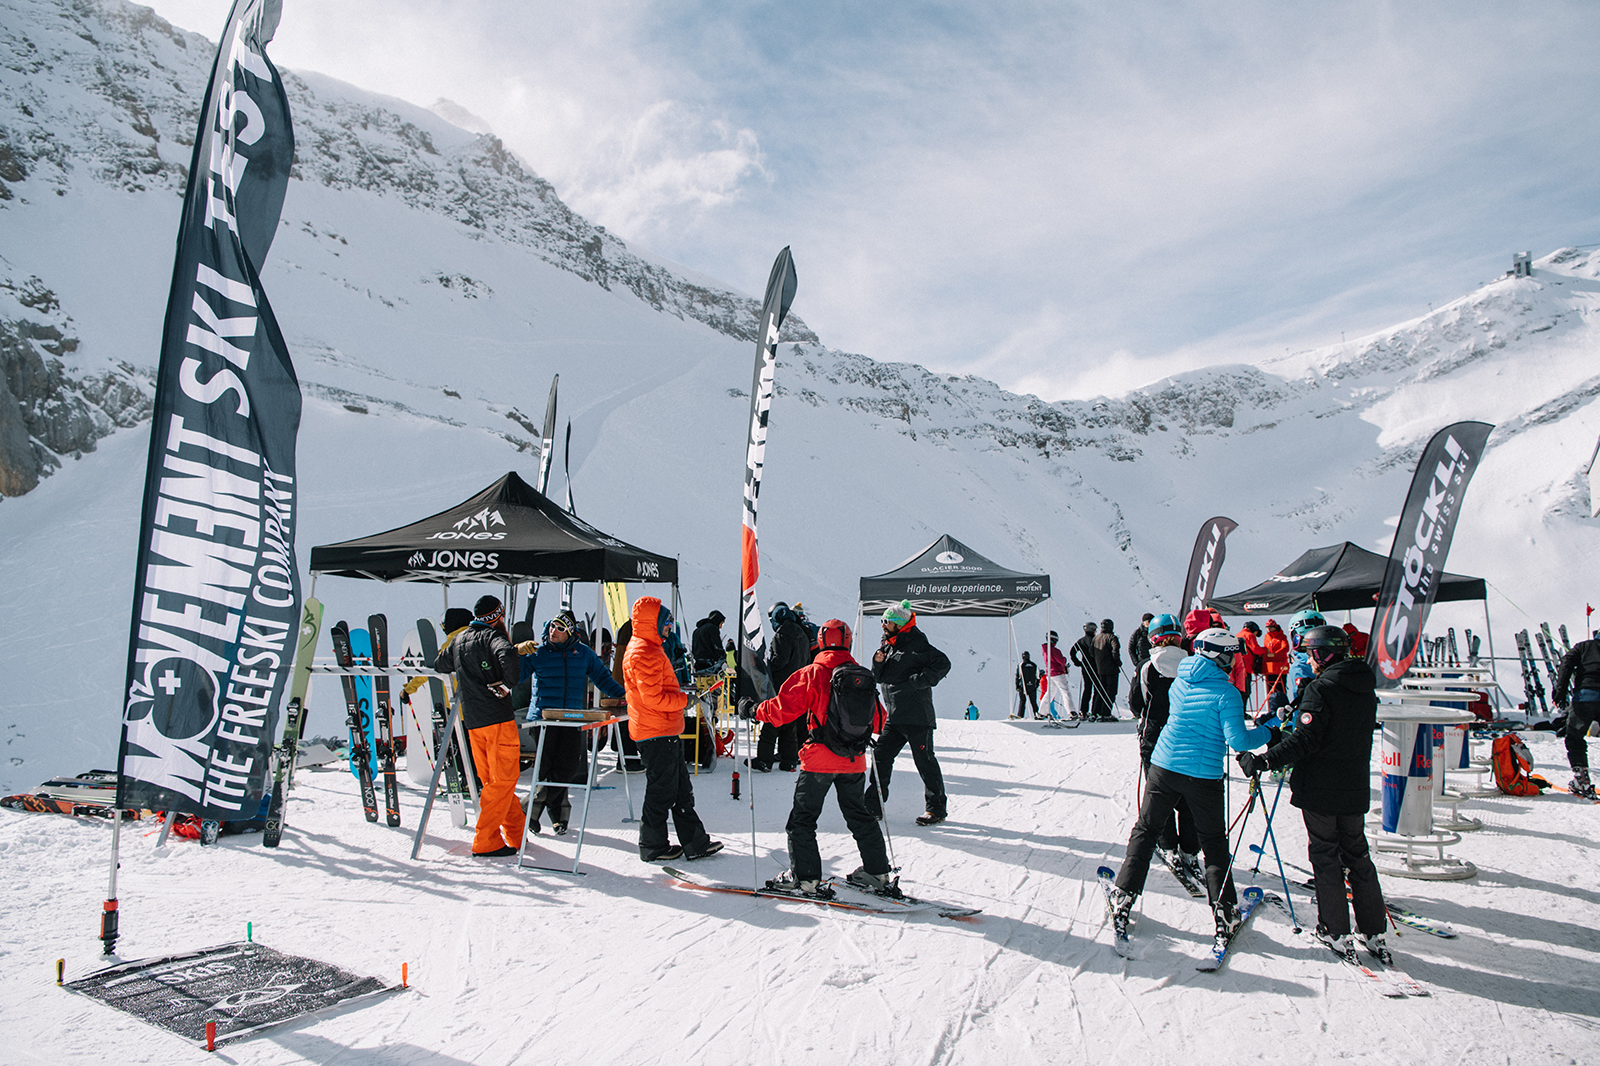 A weatherproof folding pavilion from Pro-Tent being used at a ski event in snow-conditions.